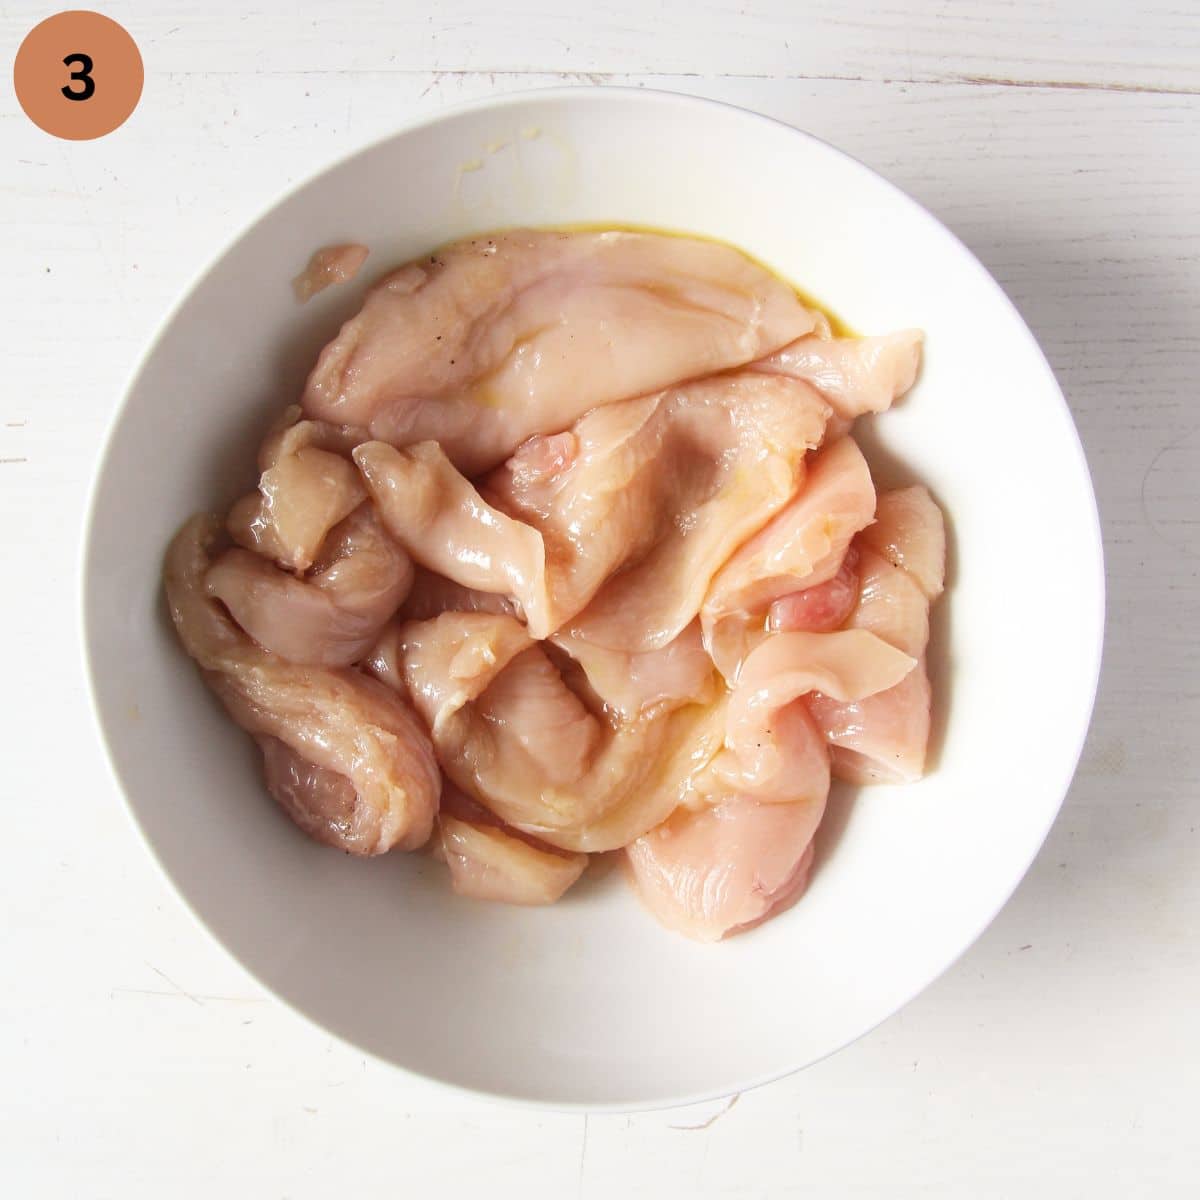 raw chicken pieces in a bowl.